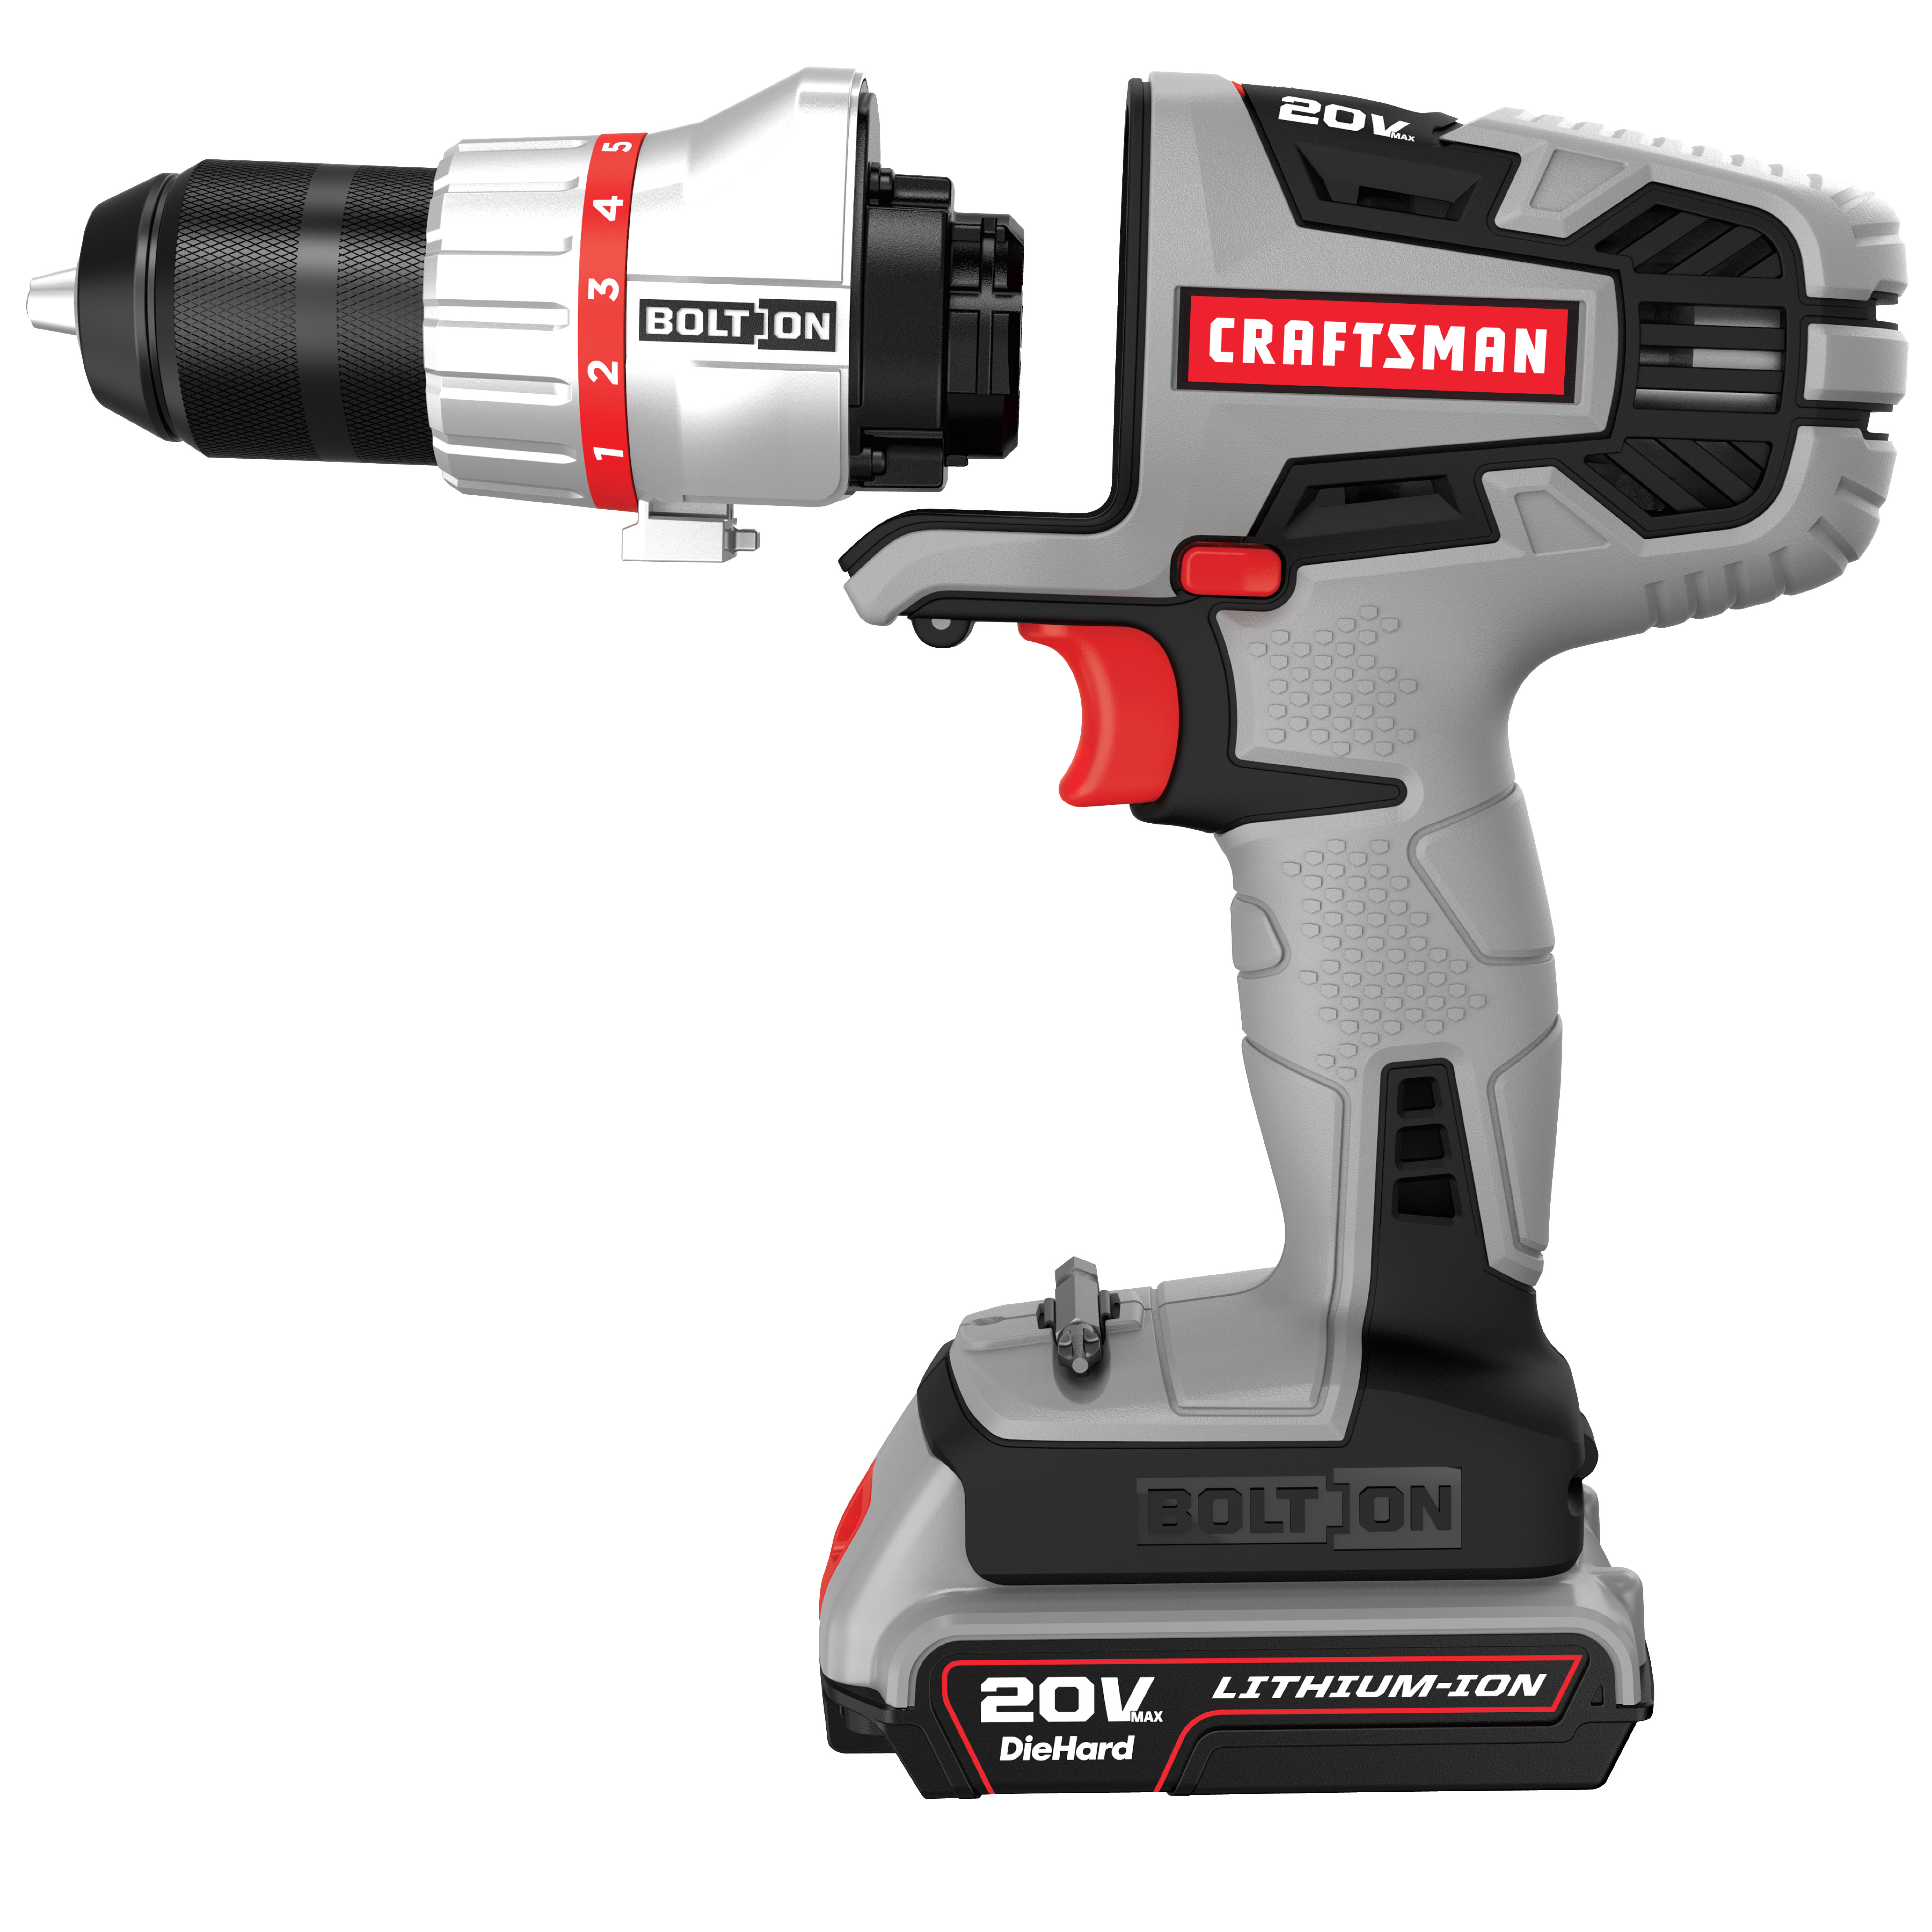 Craftsman Bolt-On ™ 20v max lithium ion drill/driver | Shop Your Way